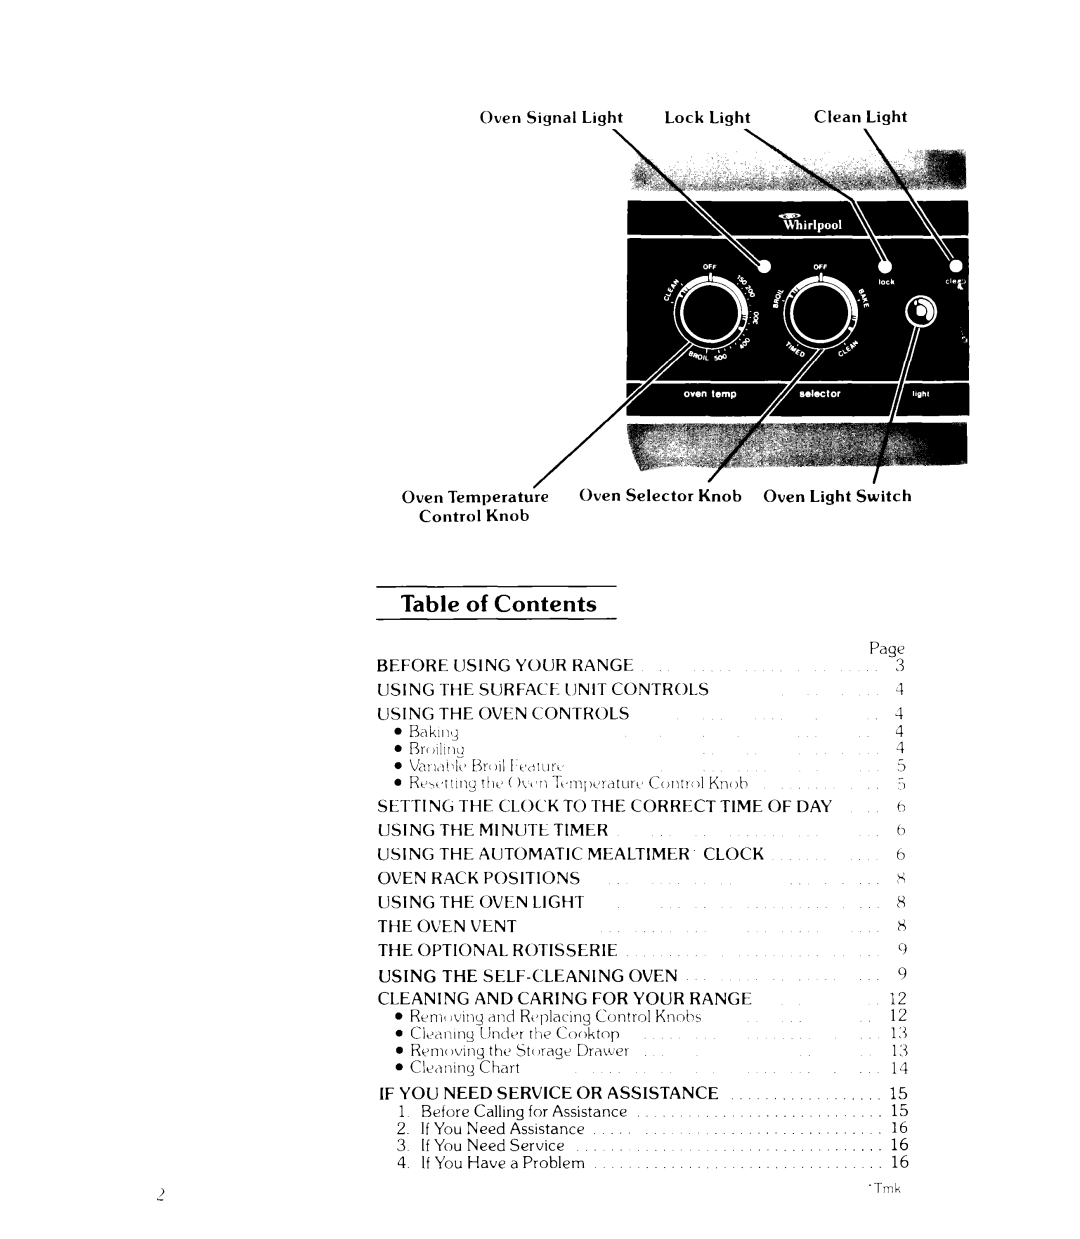 Whirlpool RJE-385P manual Table of Contents 